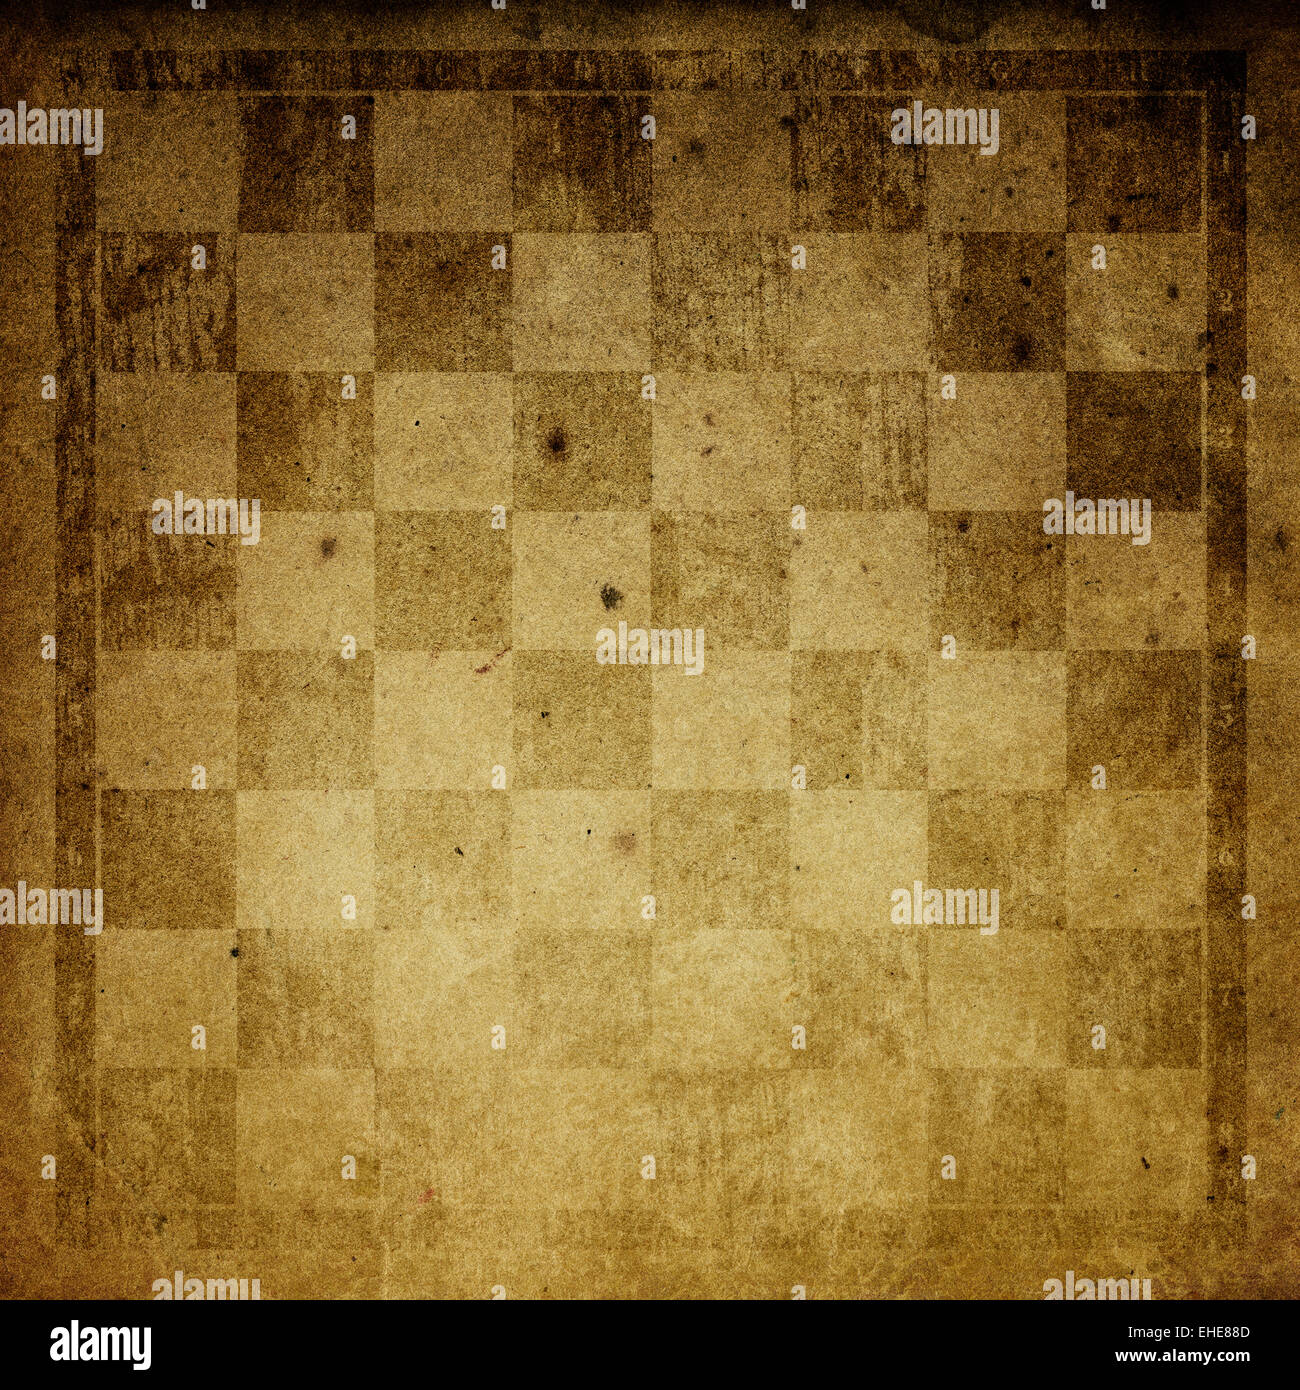 Vintage chess-board background. Stock Photo